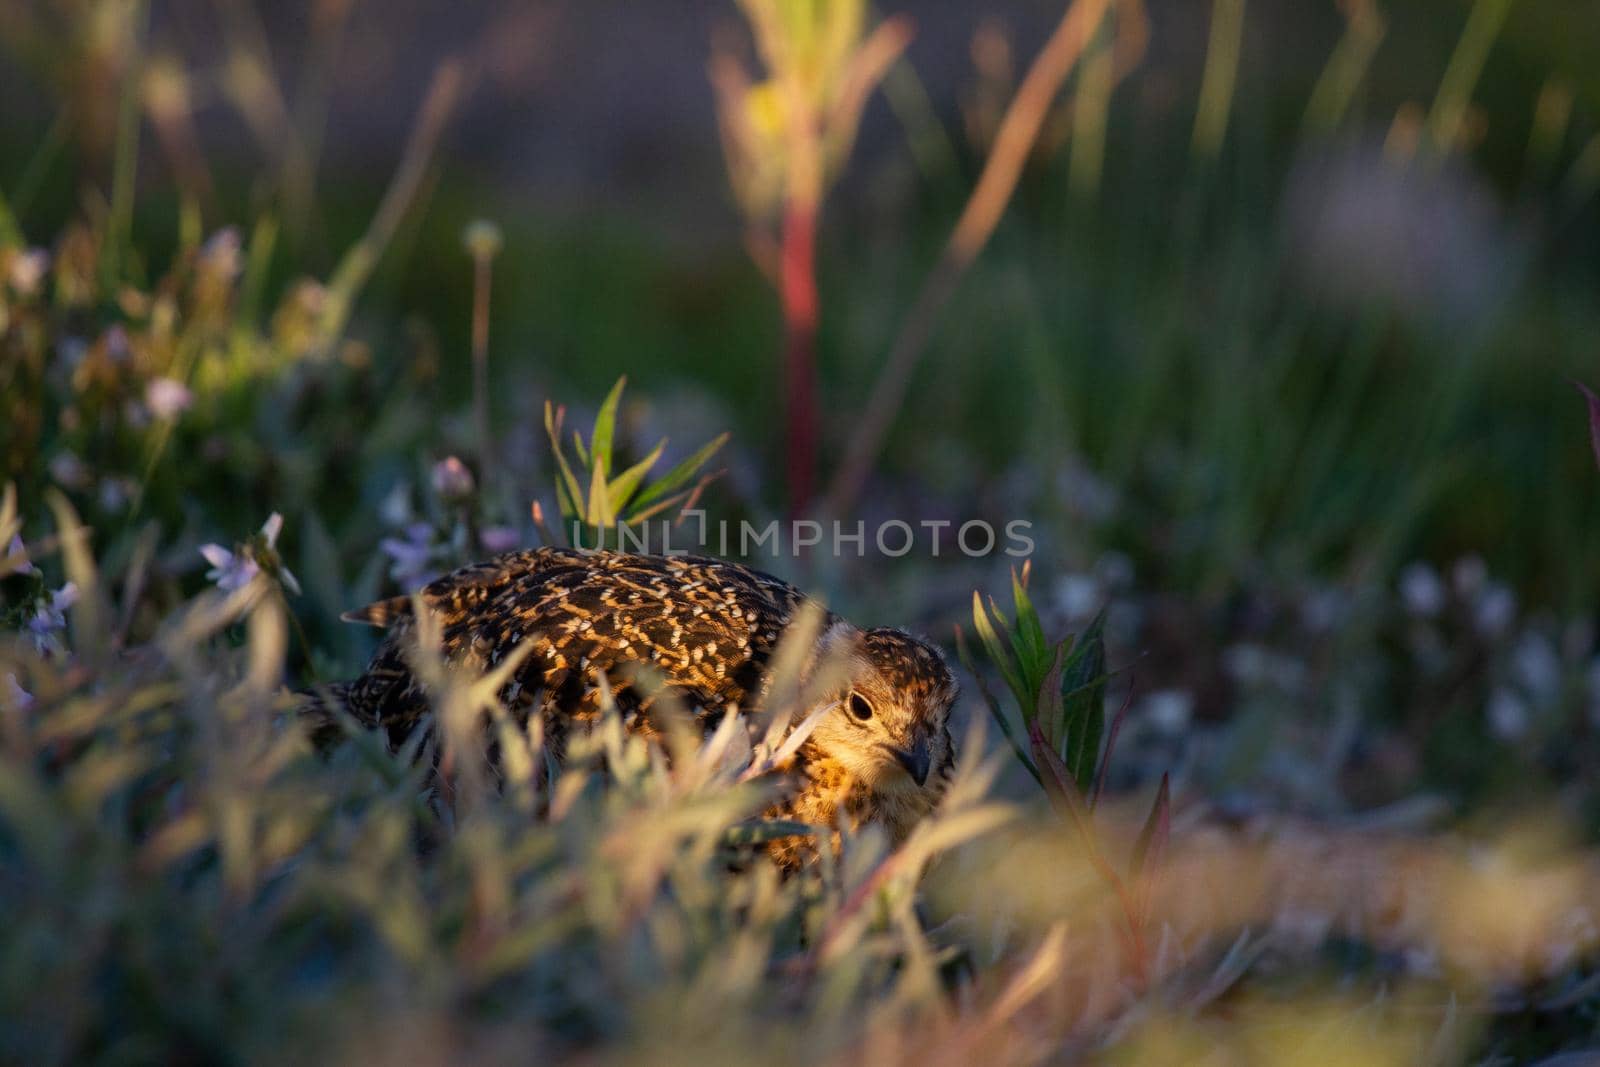 A young willow ptarmigan or grouse hiding among willows in Canada's arctic tundra by Granchinho